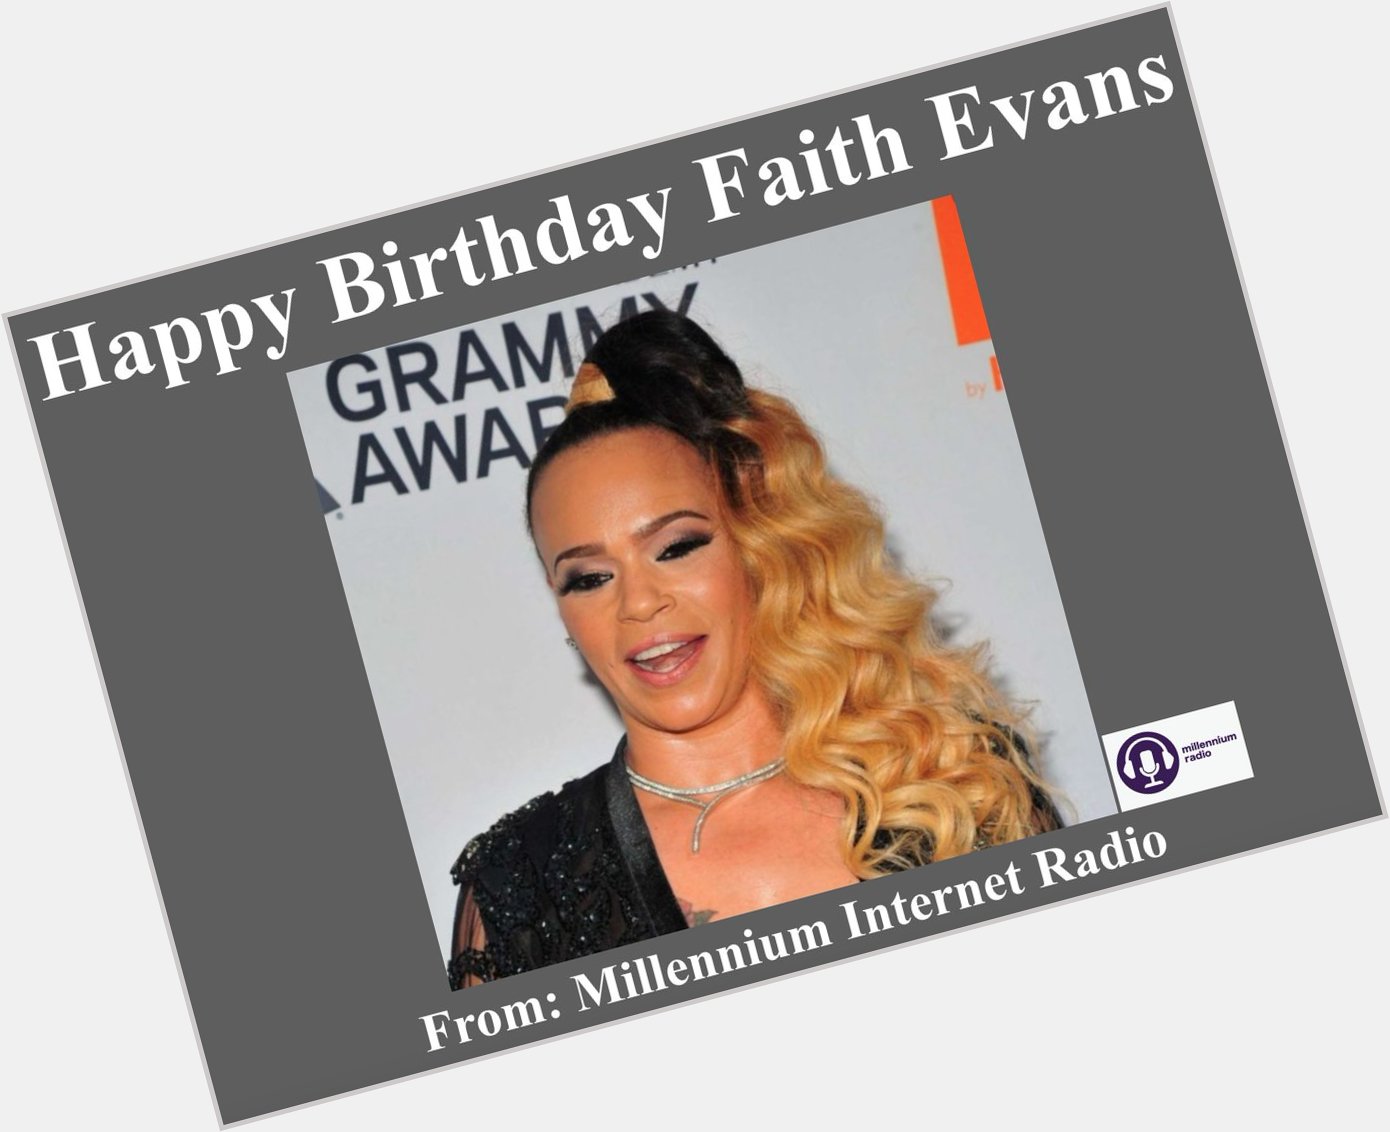 Happy Birthday to singer, songwriter, and actress Faith Evans! 